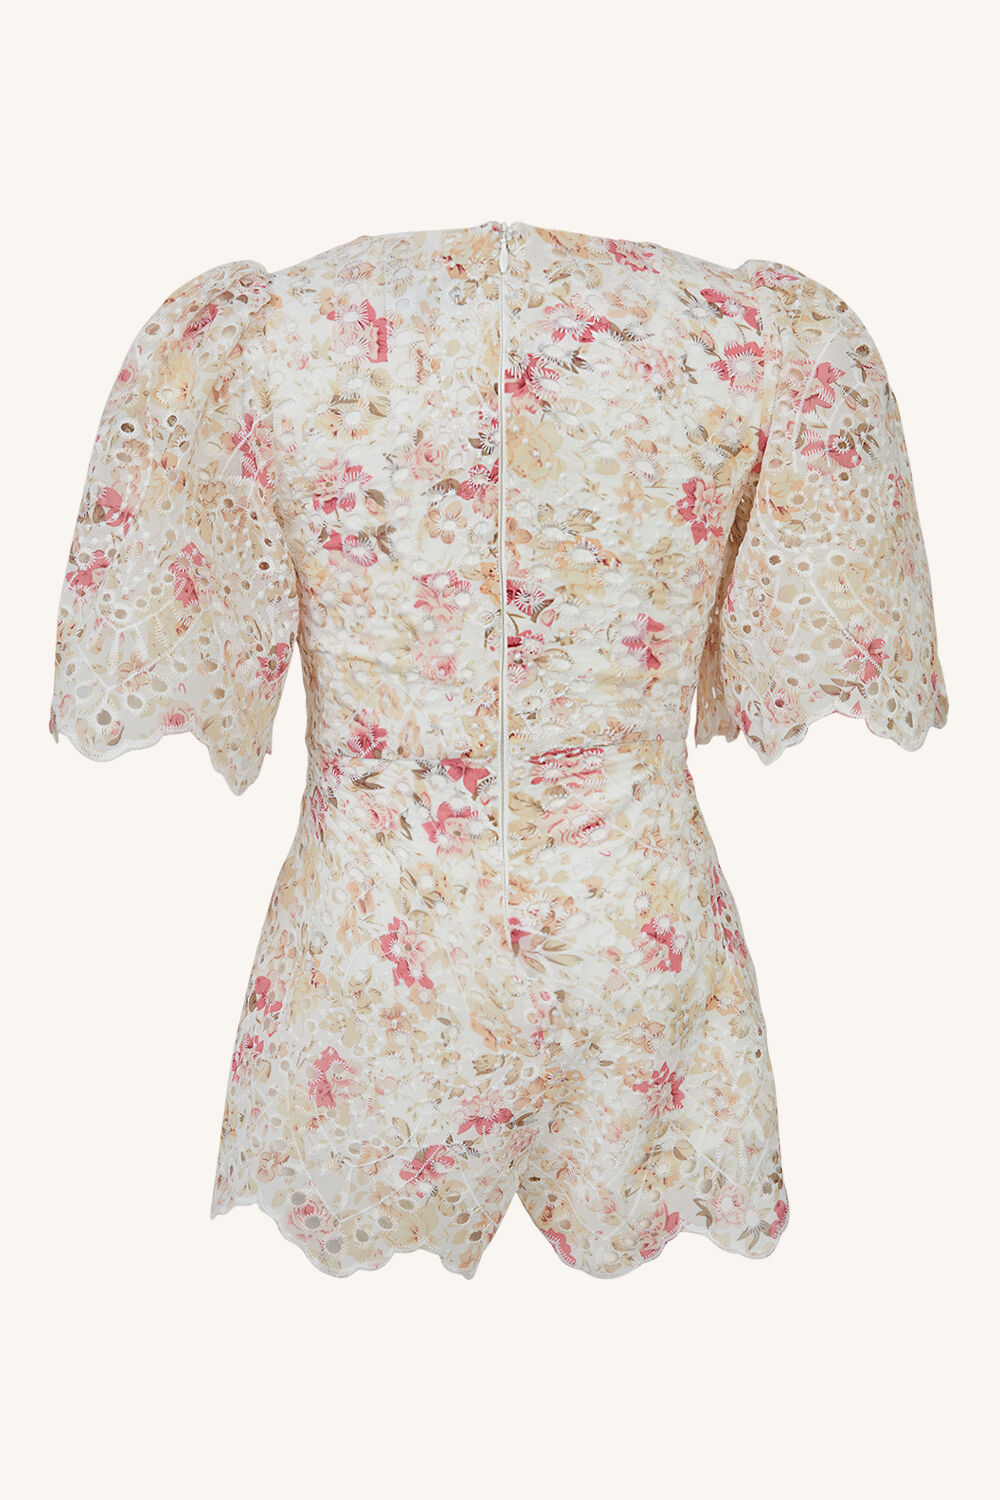 GIRLS AMELIA FLORAL PLAYSUIT in colour SACHET PINK